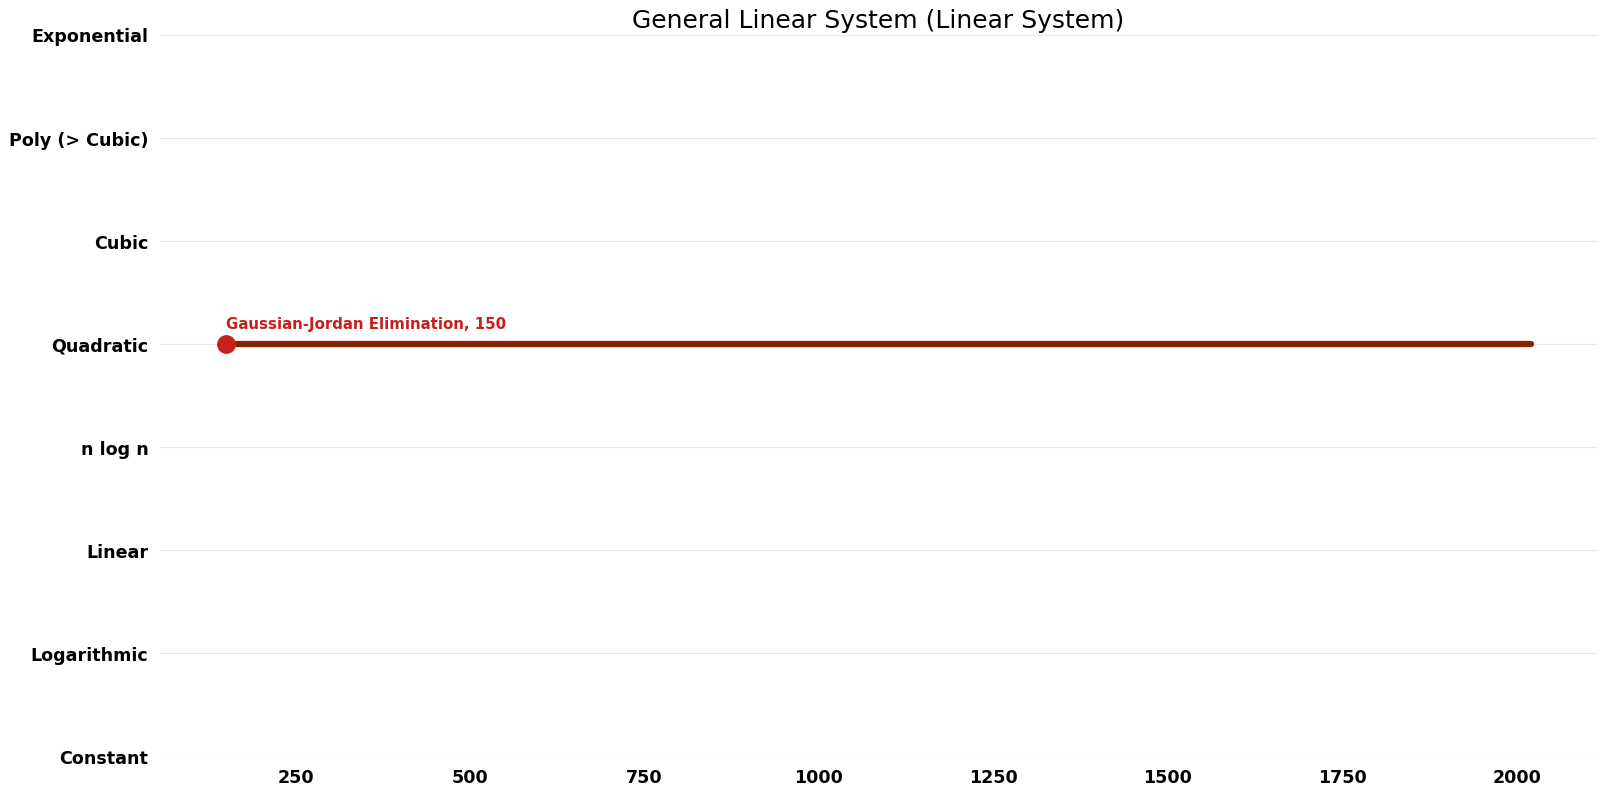 Linear System - General Linear System - Space.png